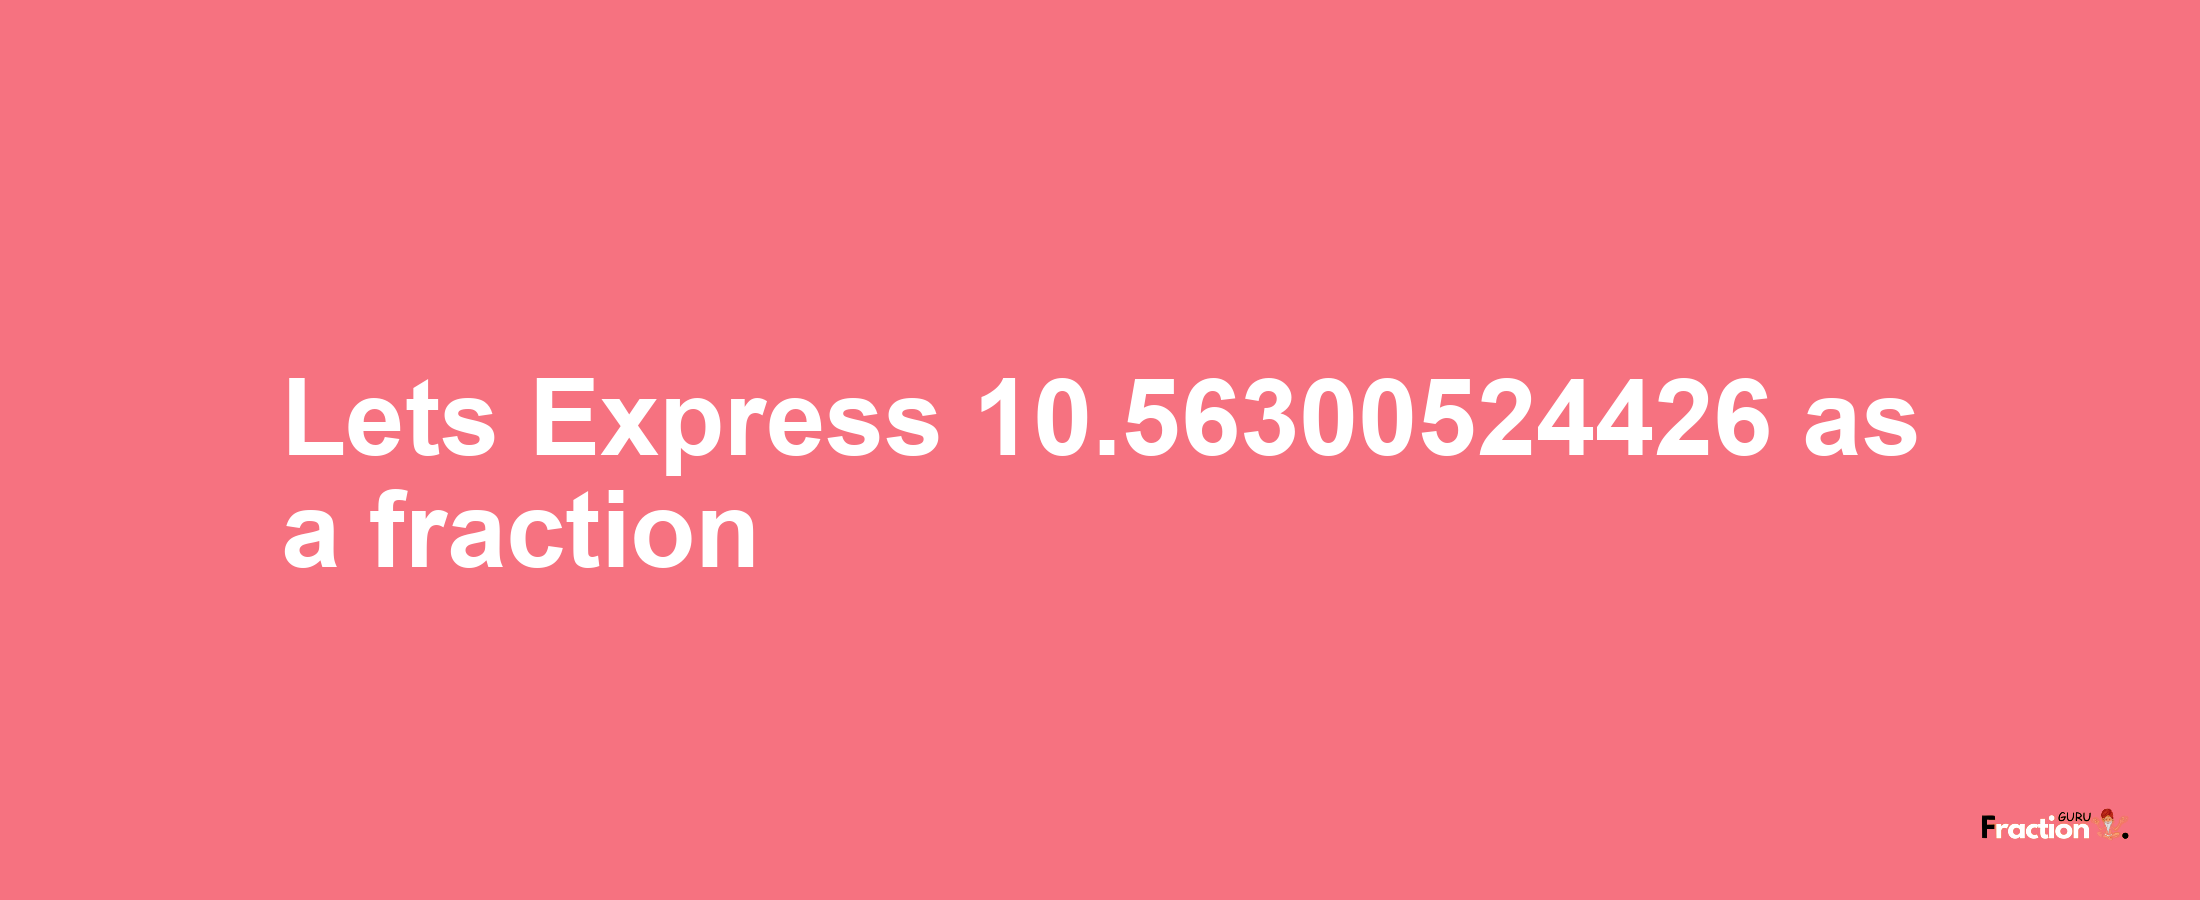 Lets Express 10.56300524426 as afraction